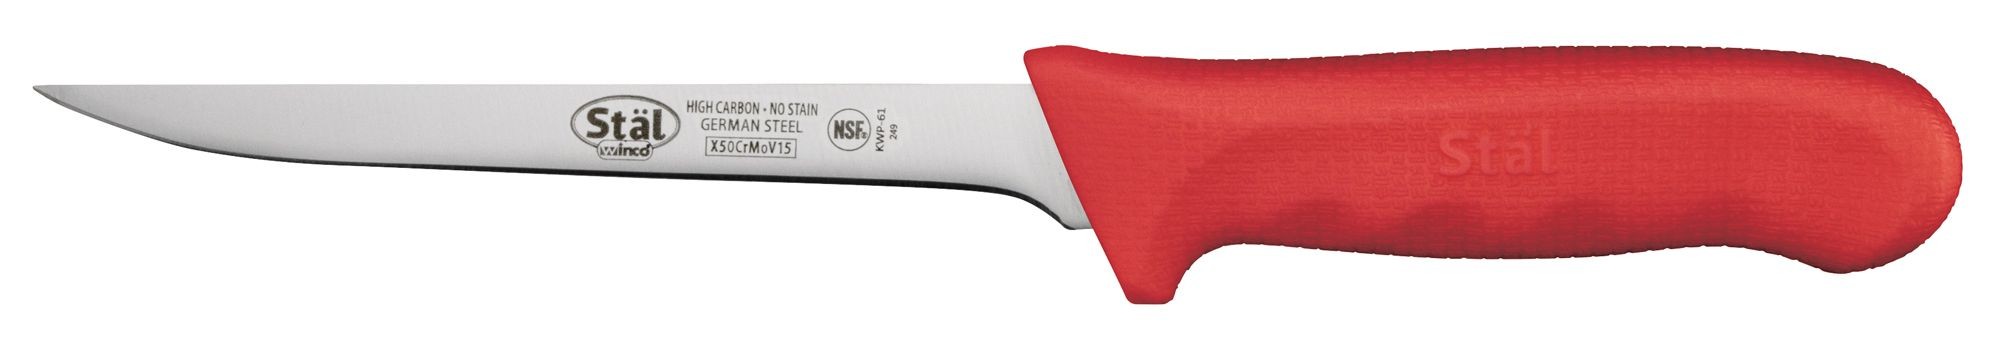 Winco KWP-61R Narrow 6" Boning Knife with Red Handle